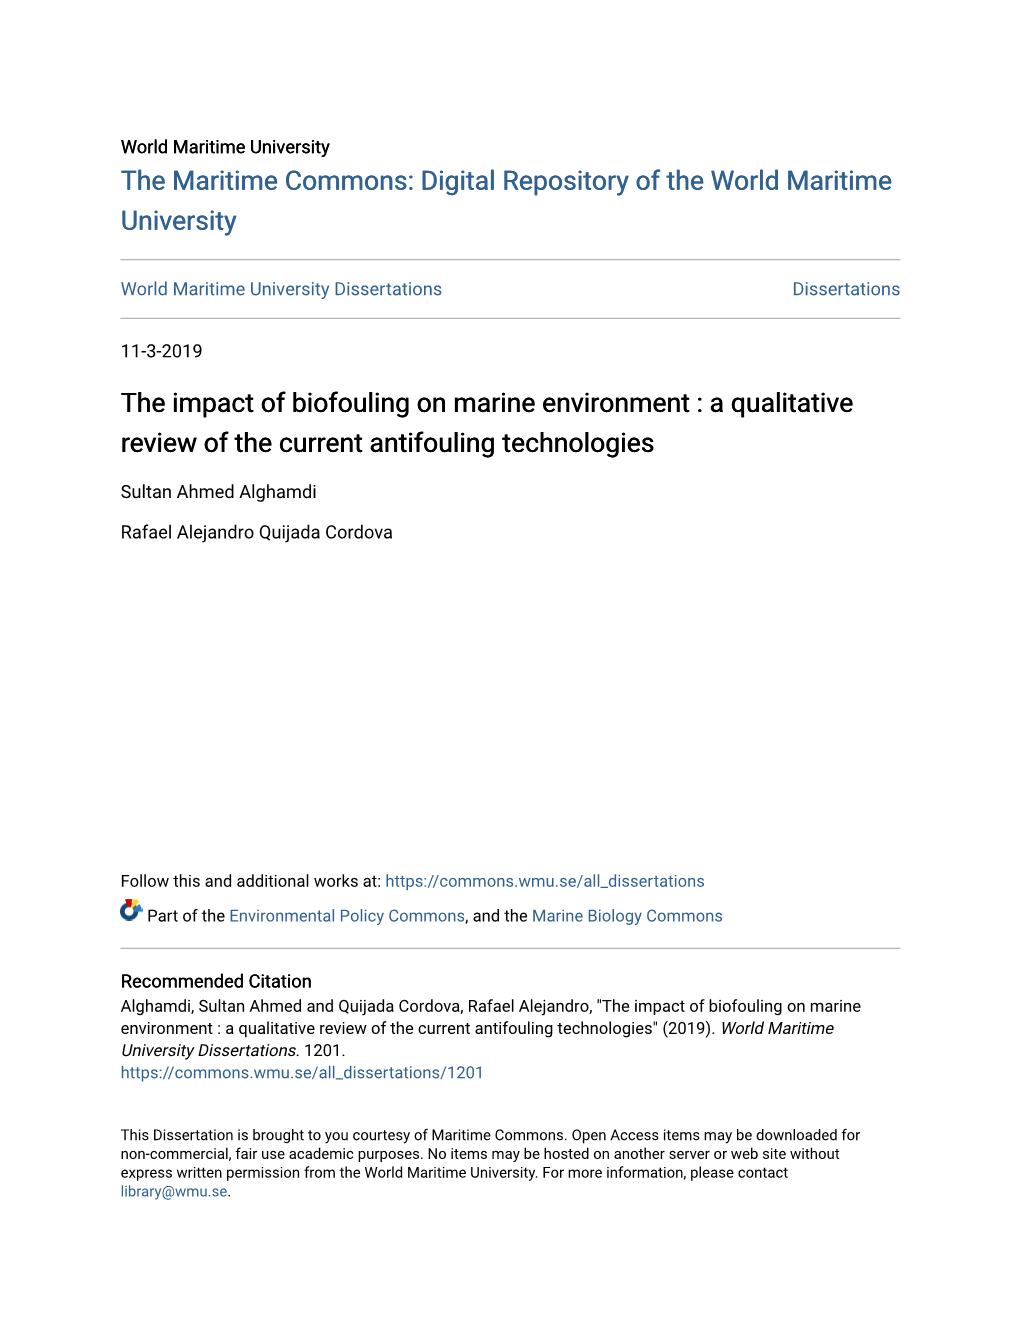 The Impact of Biofouling on Marine Environment : a Qualitative Review of the Current Antifouling Technologies